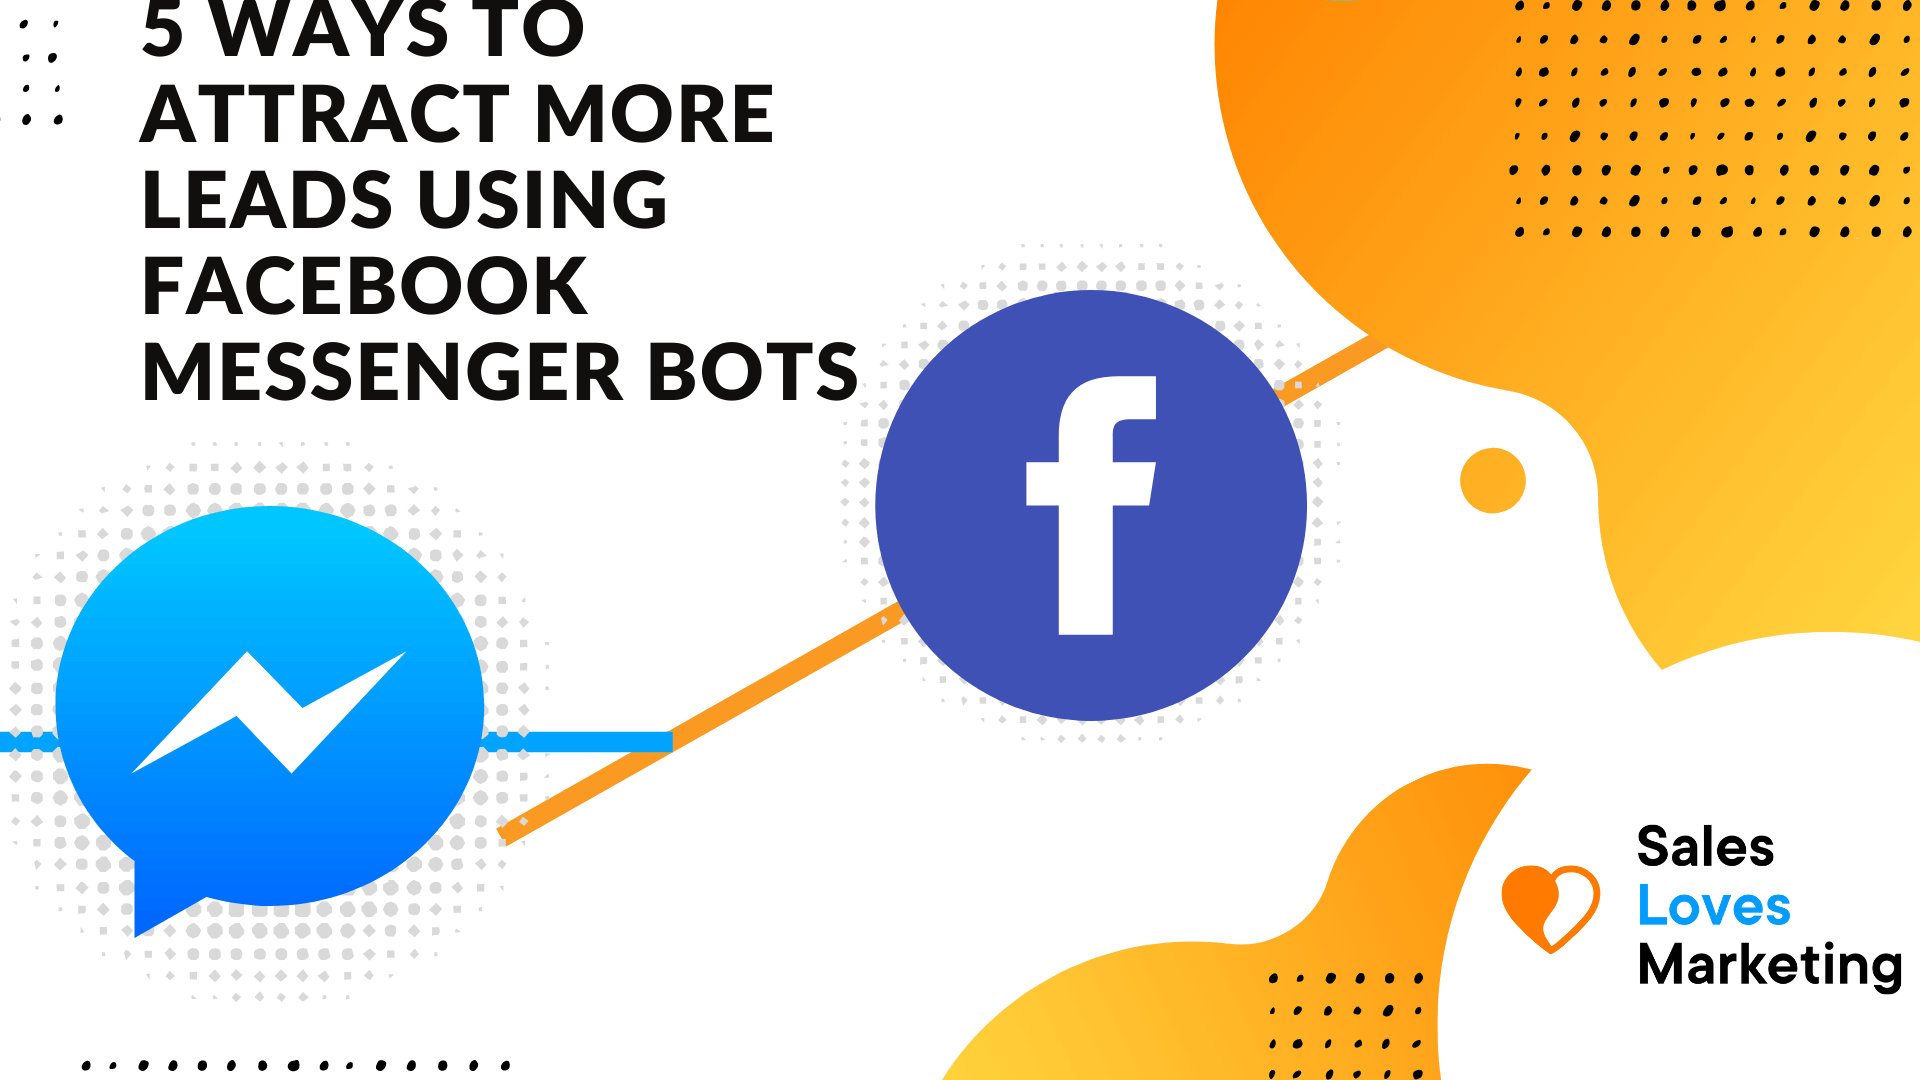 5 Ways To Attract More Leads Using Facebook Messenger Bots  